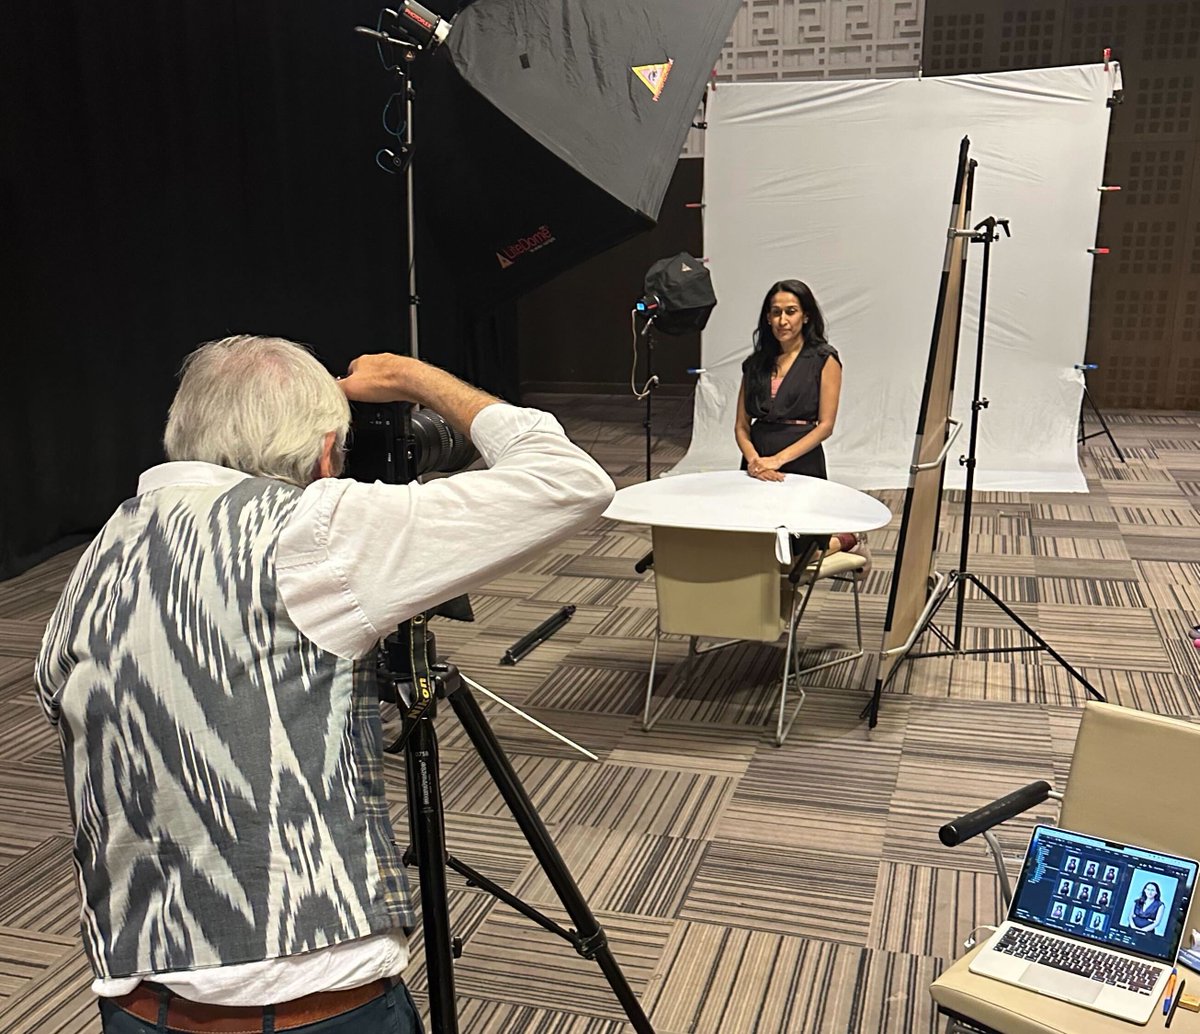 📸 LIVE from Morocco! The Simprints team have found time in a packed schedule for an amazing photoshoot with the wonderful Alan Keohane MBE and team. #team #photos #brand